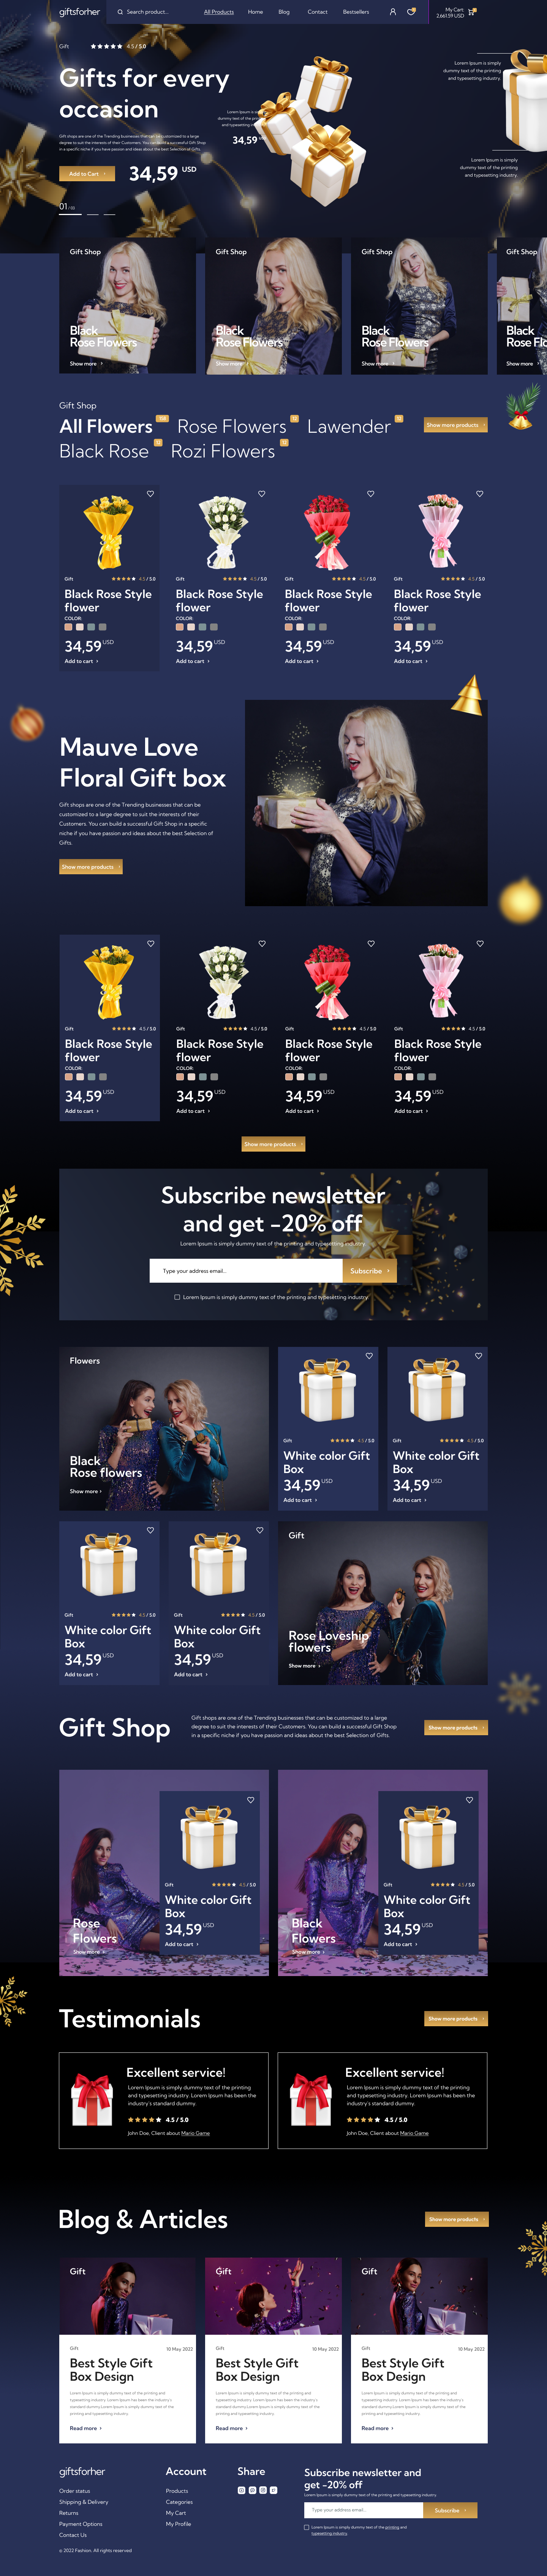 Gifts For Her – Mobile Apps for eCommerceGo SaaS